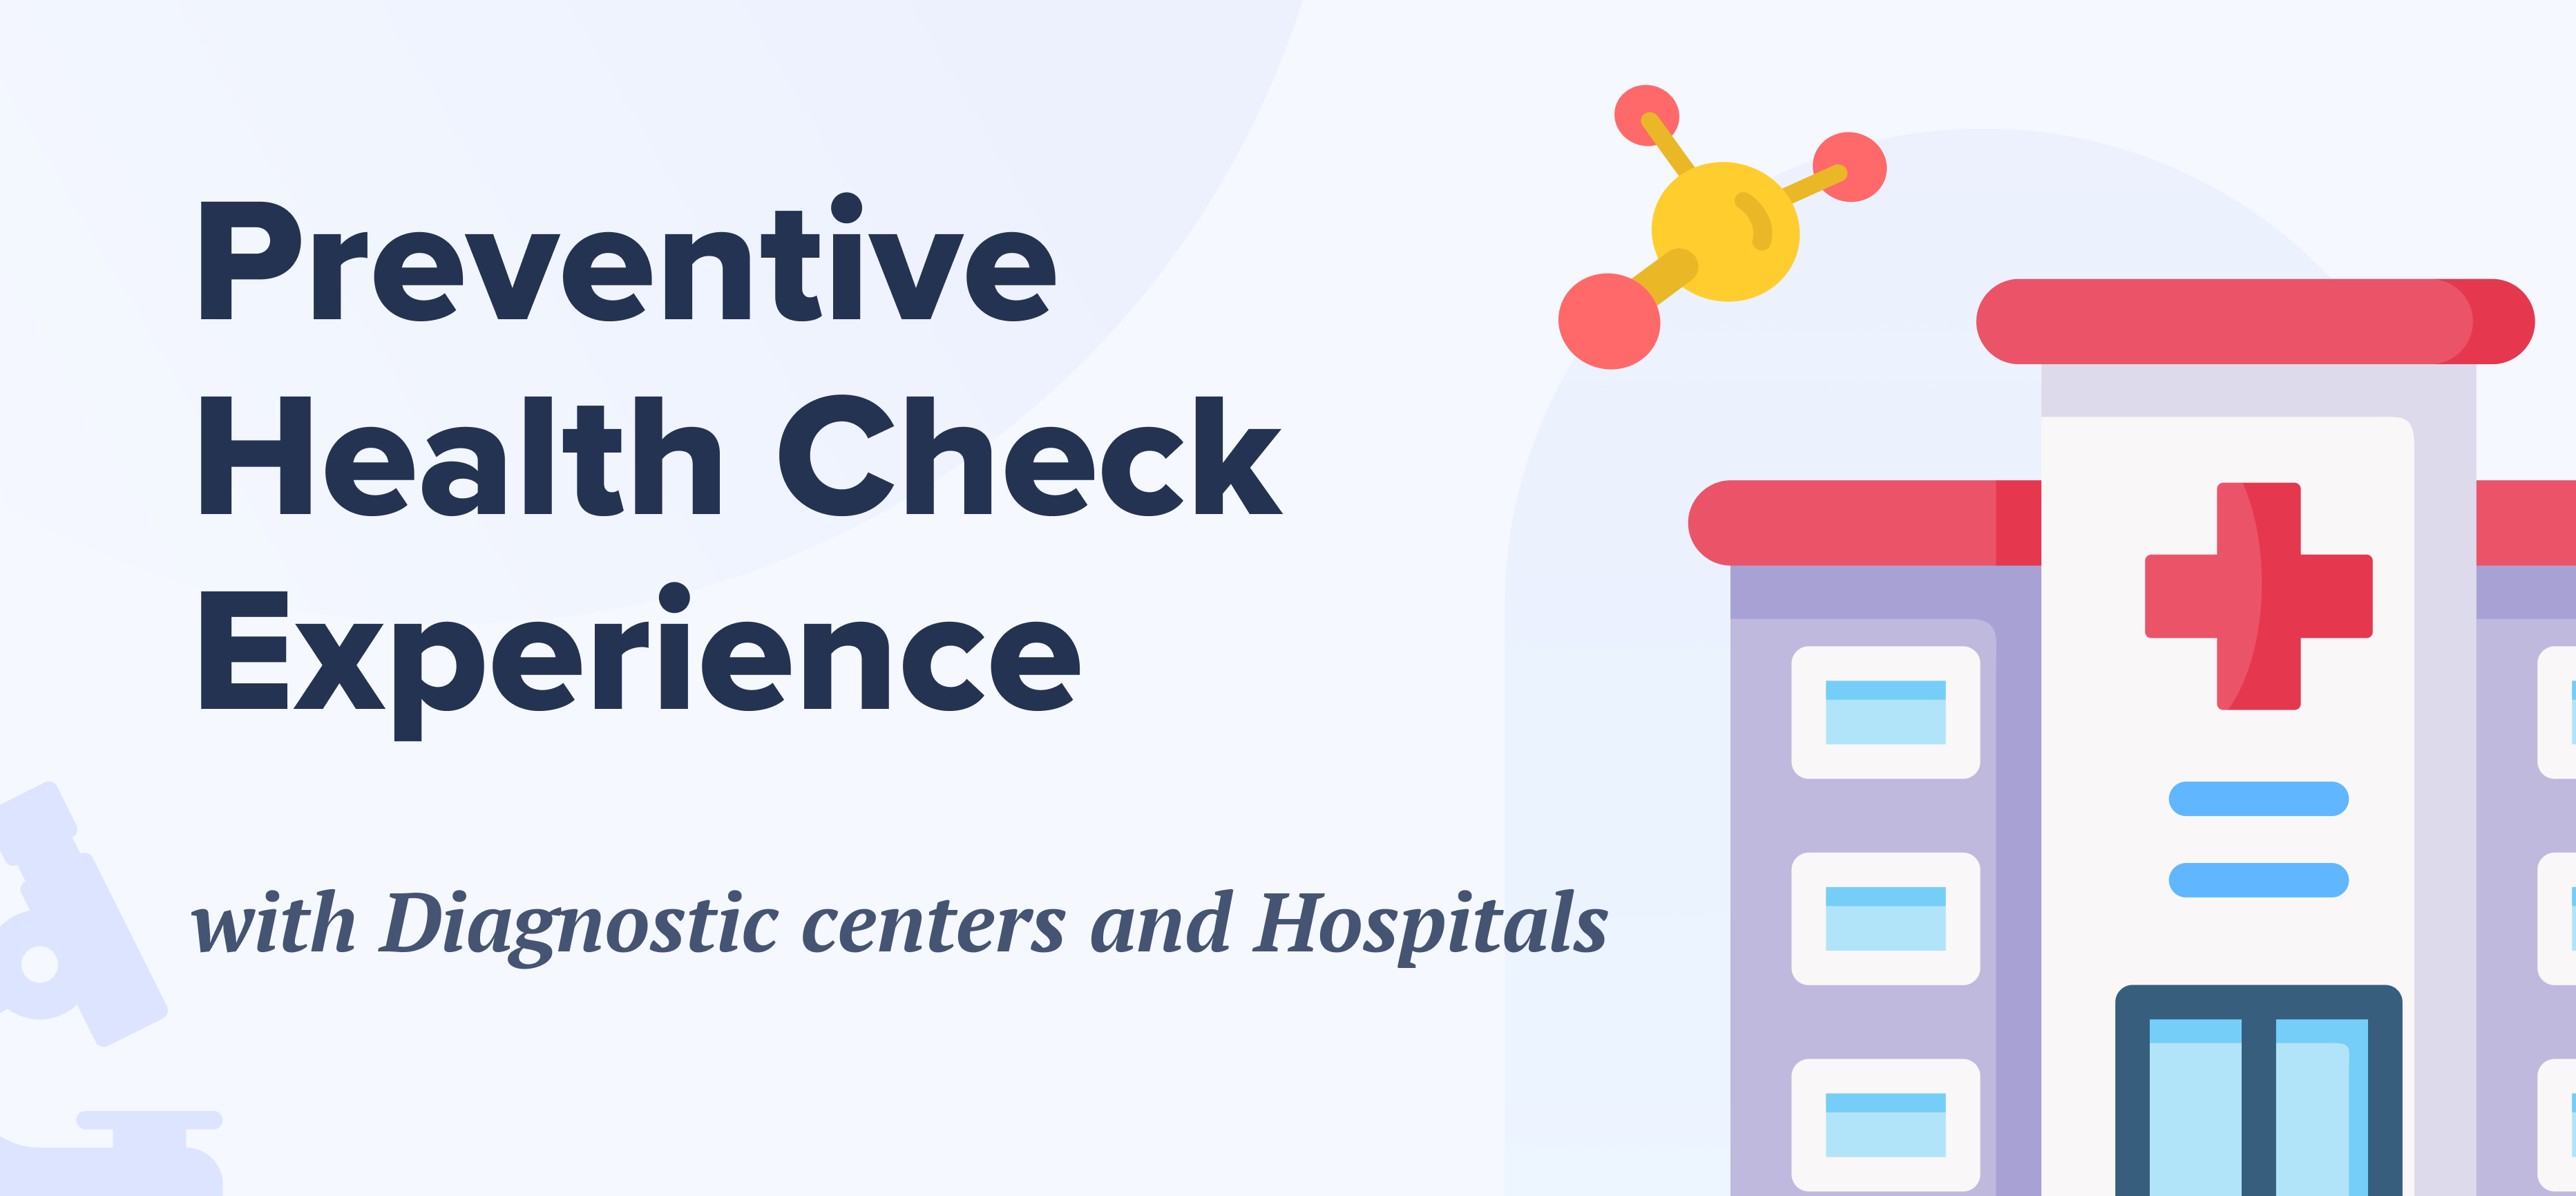 Preventive Health Check Experience with Diagnostic Centers and Hospitals